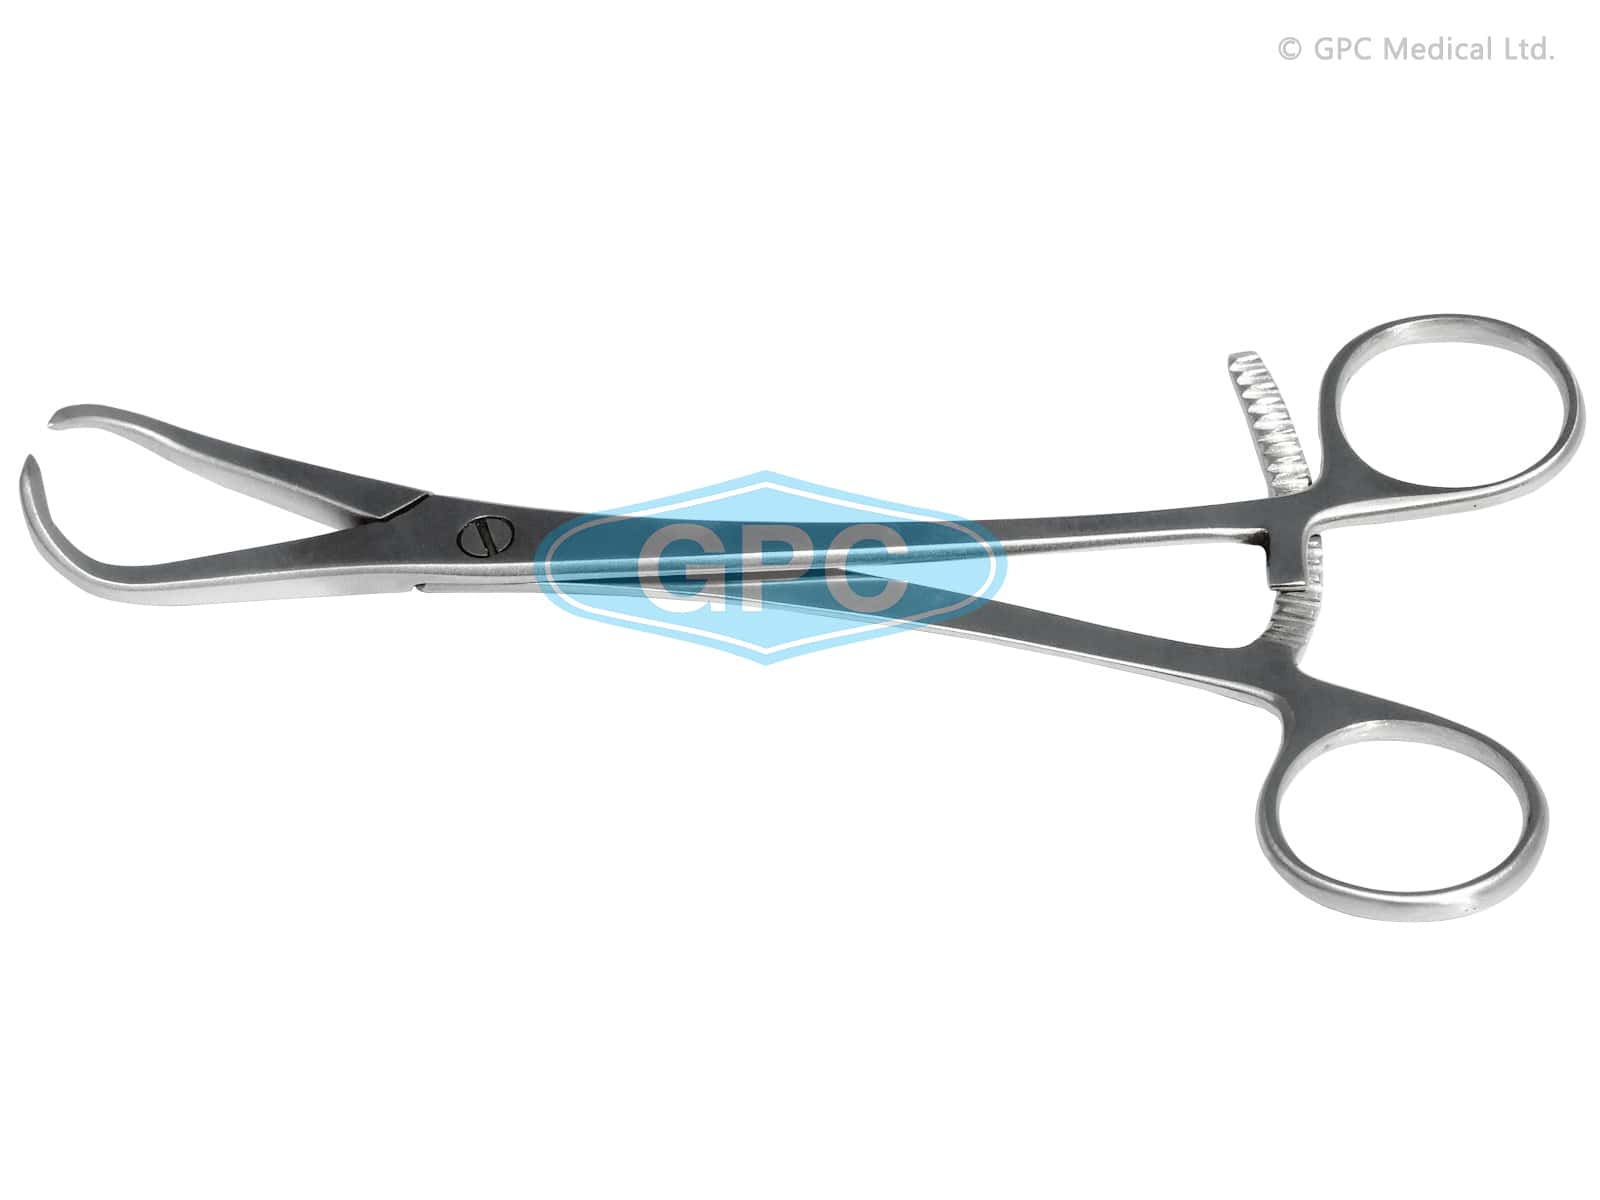 Reduction Forceps Pointed, Ratchet Lock